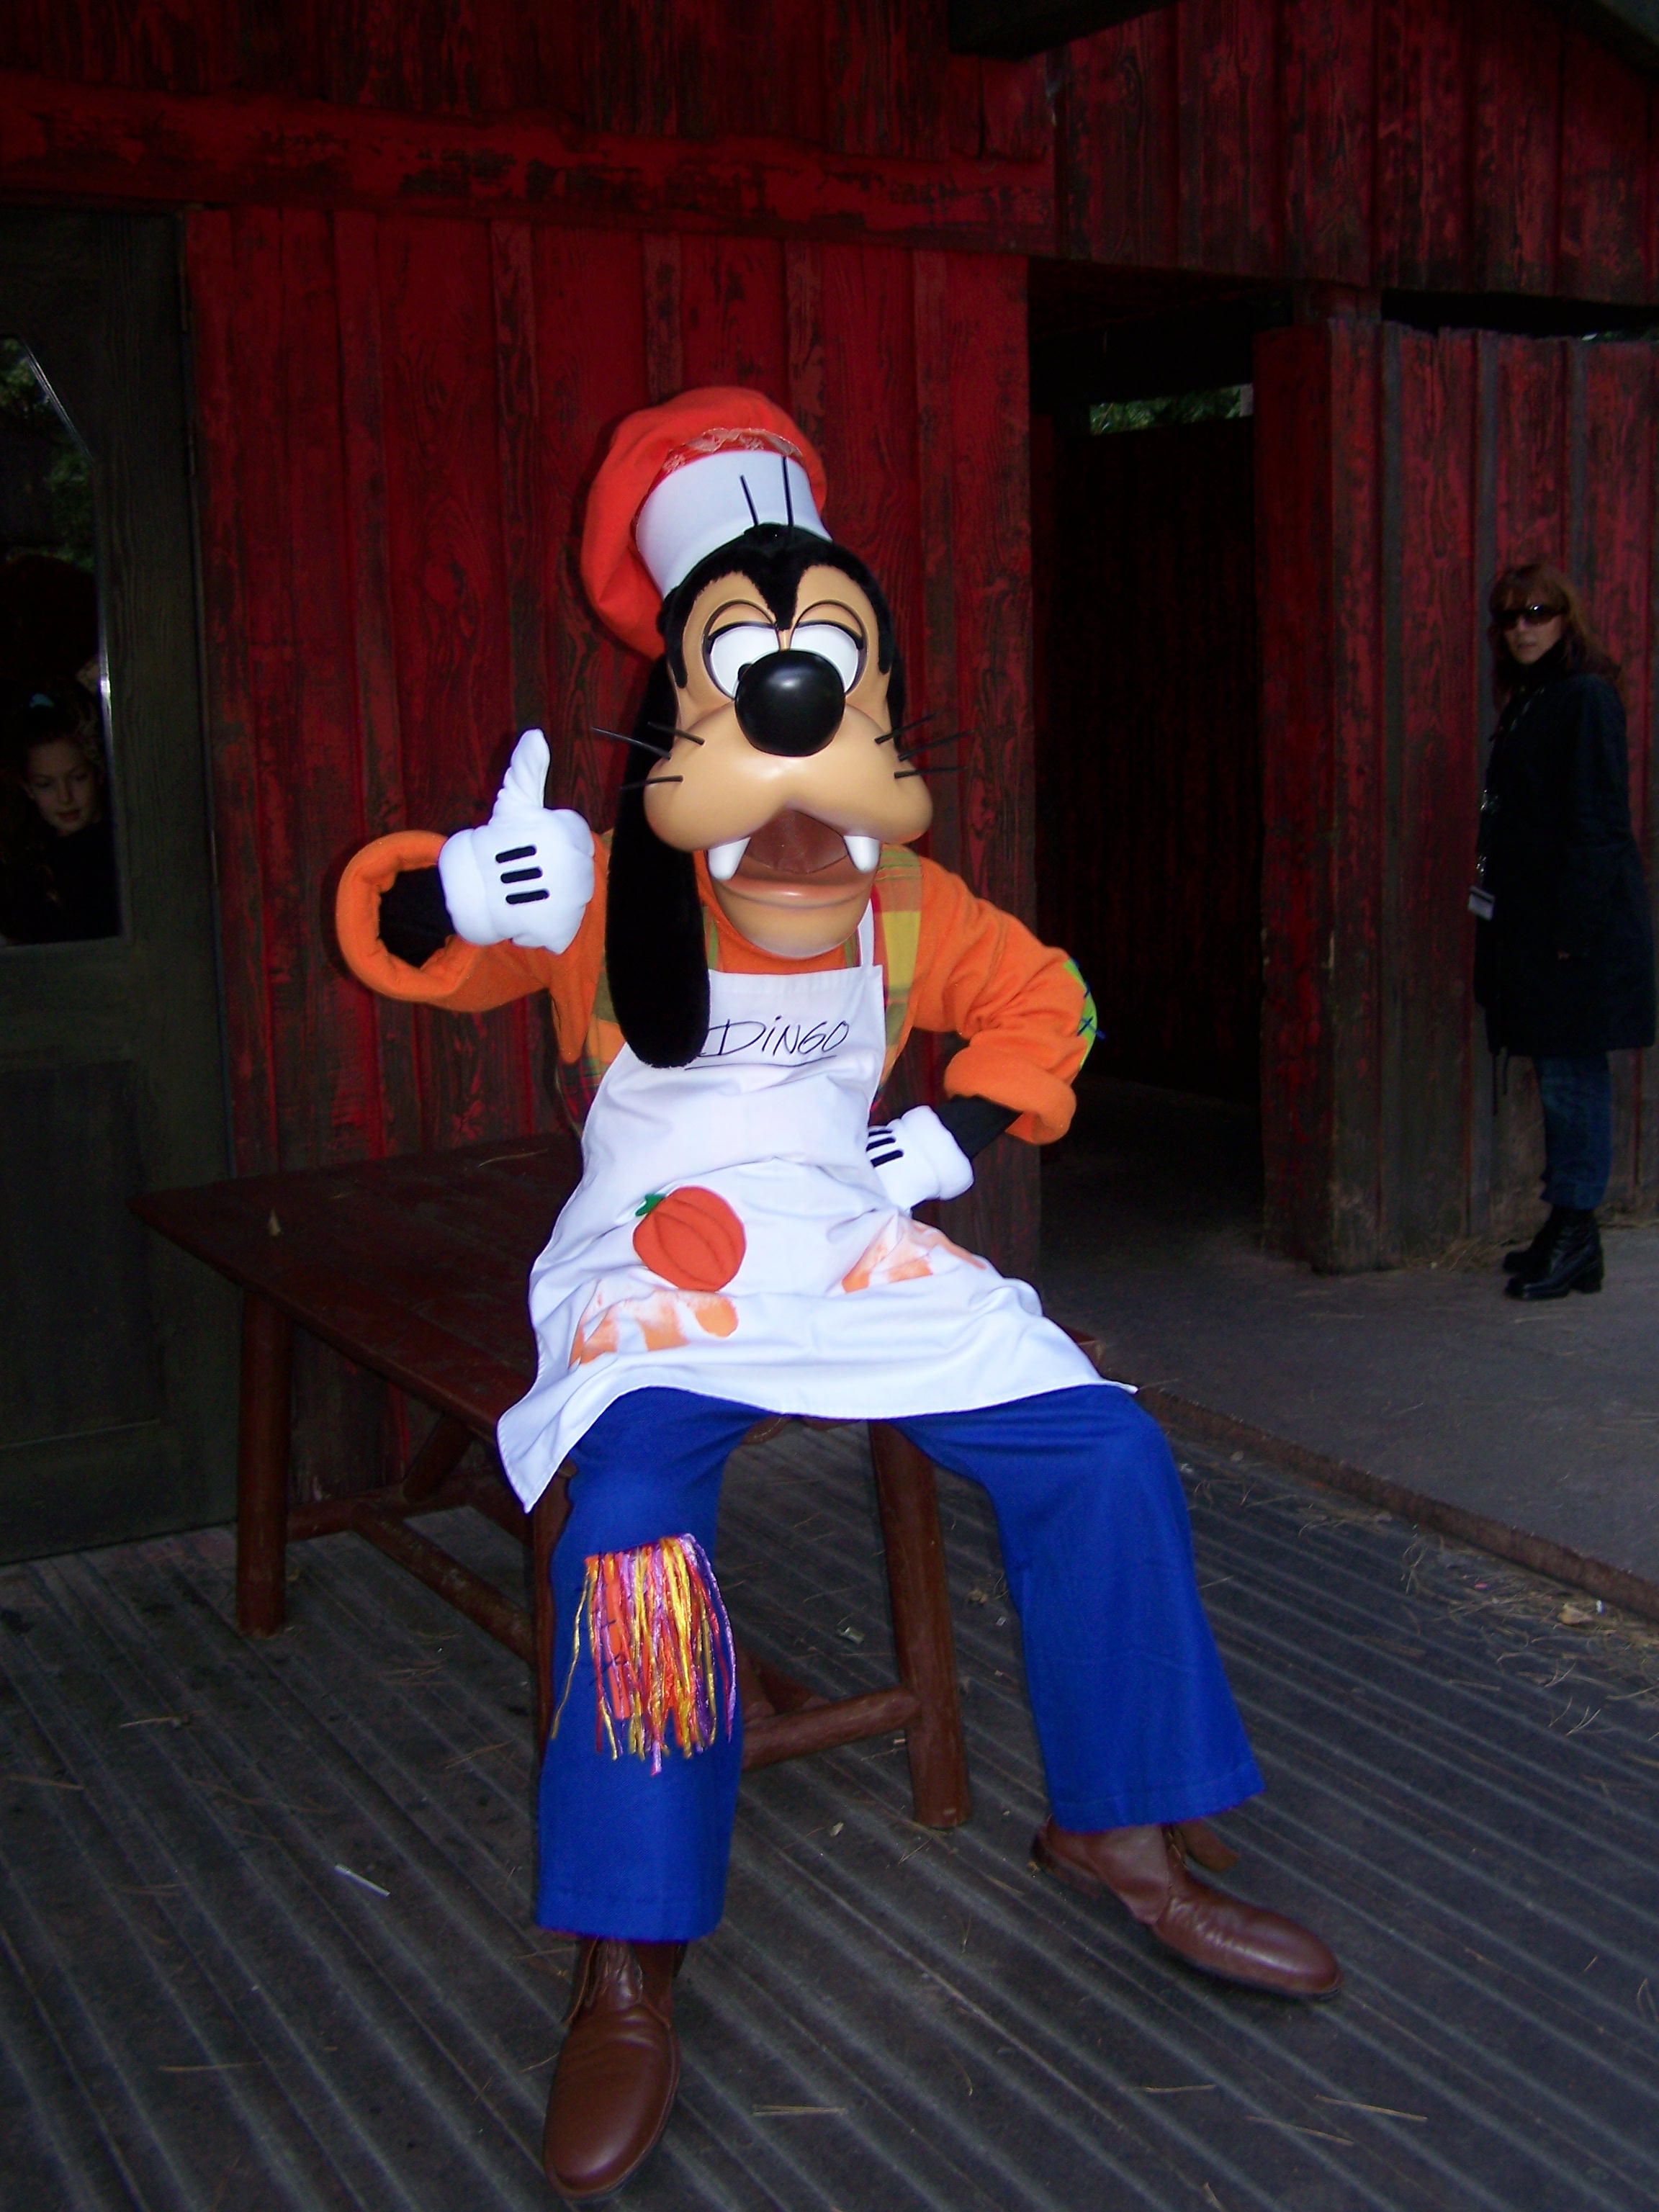 During the Halloween season of 2007 Goofy had a small show in Frontierland featuring breakdancers. He wore this Halloween Cook outfit during this show.